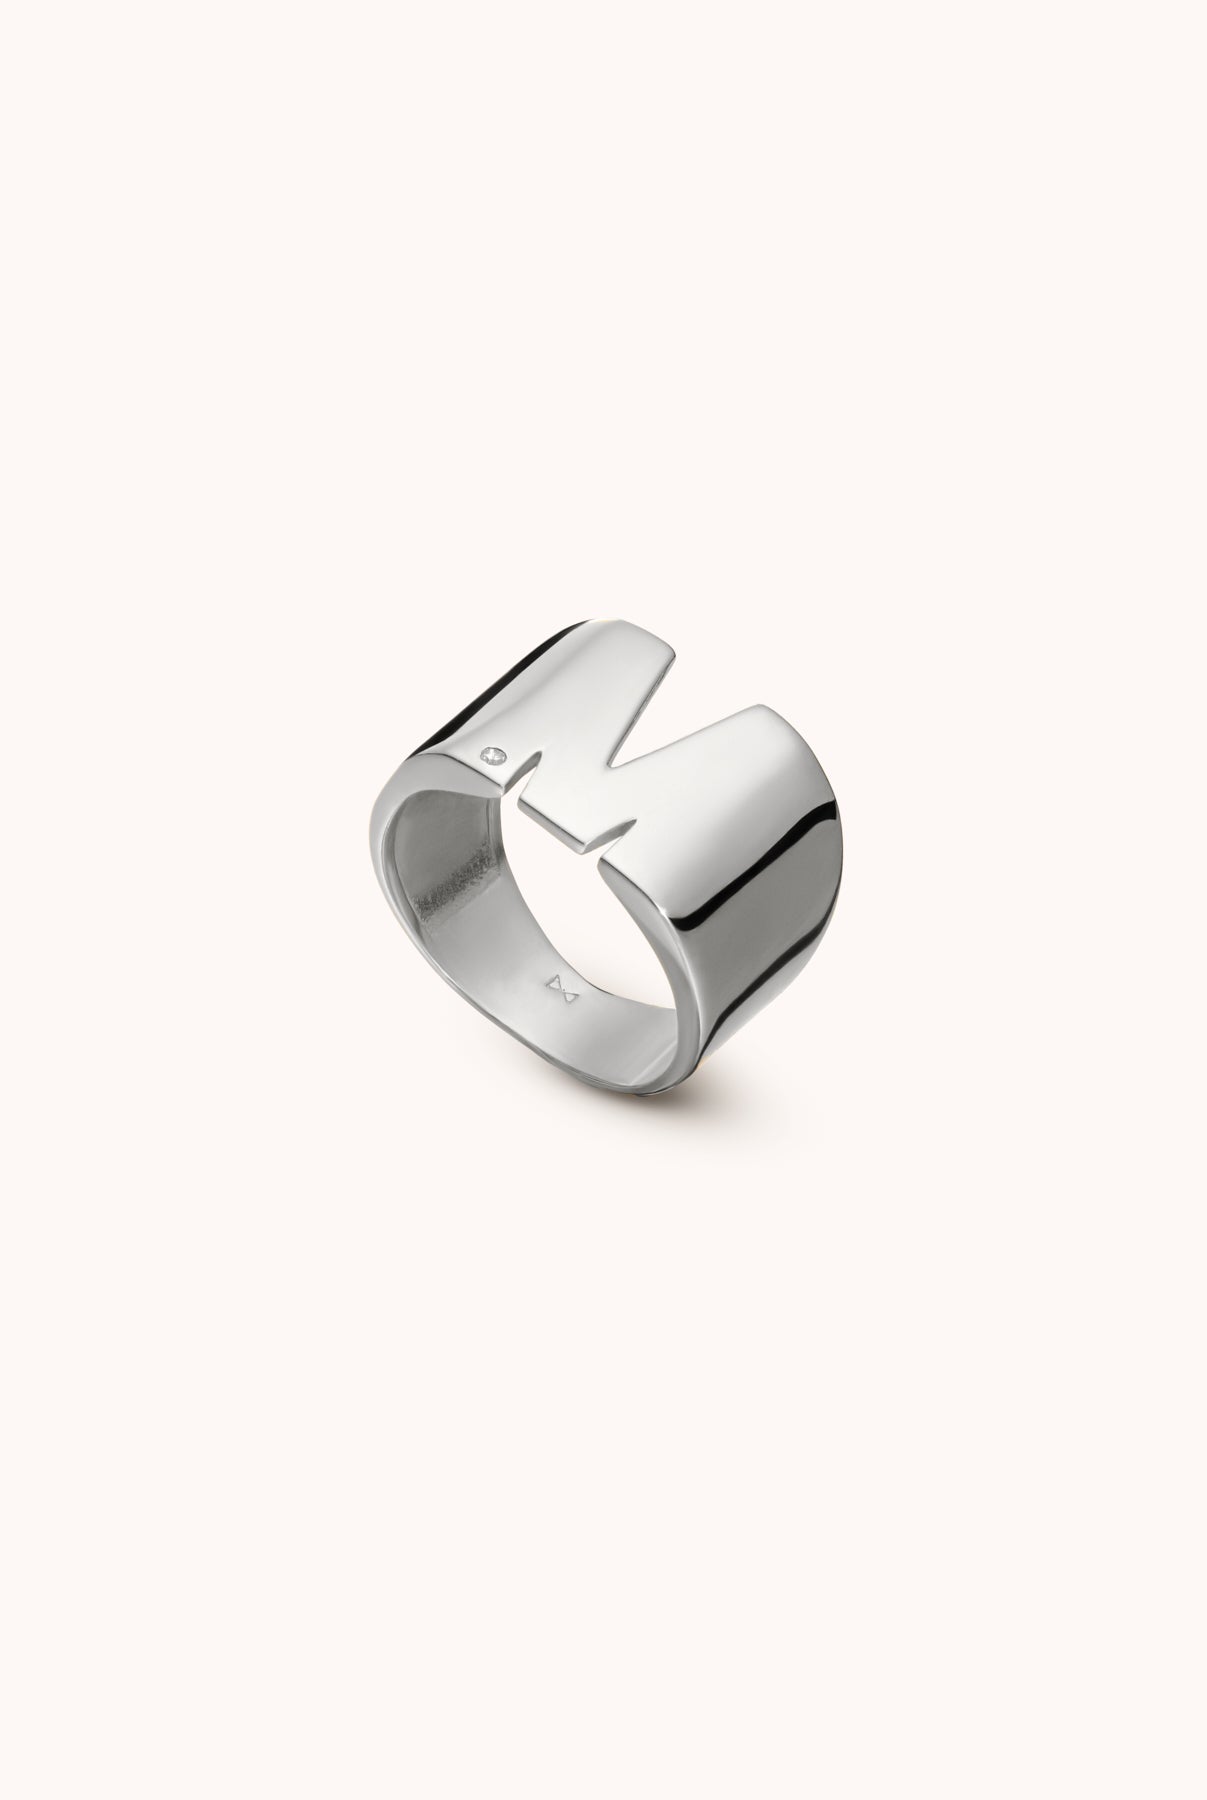 SILVER INITIAL SILHOUETTE RING